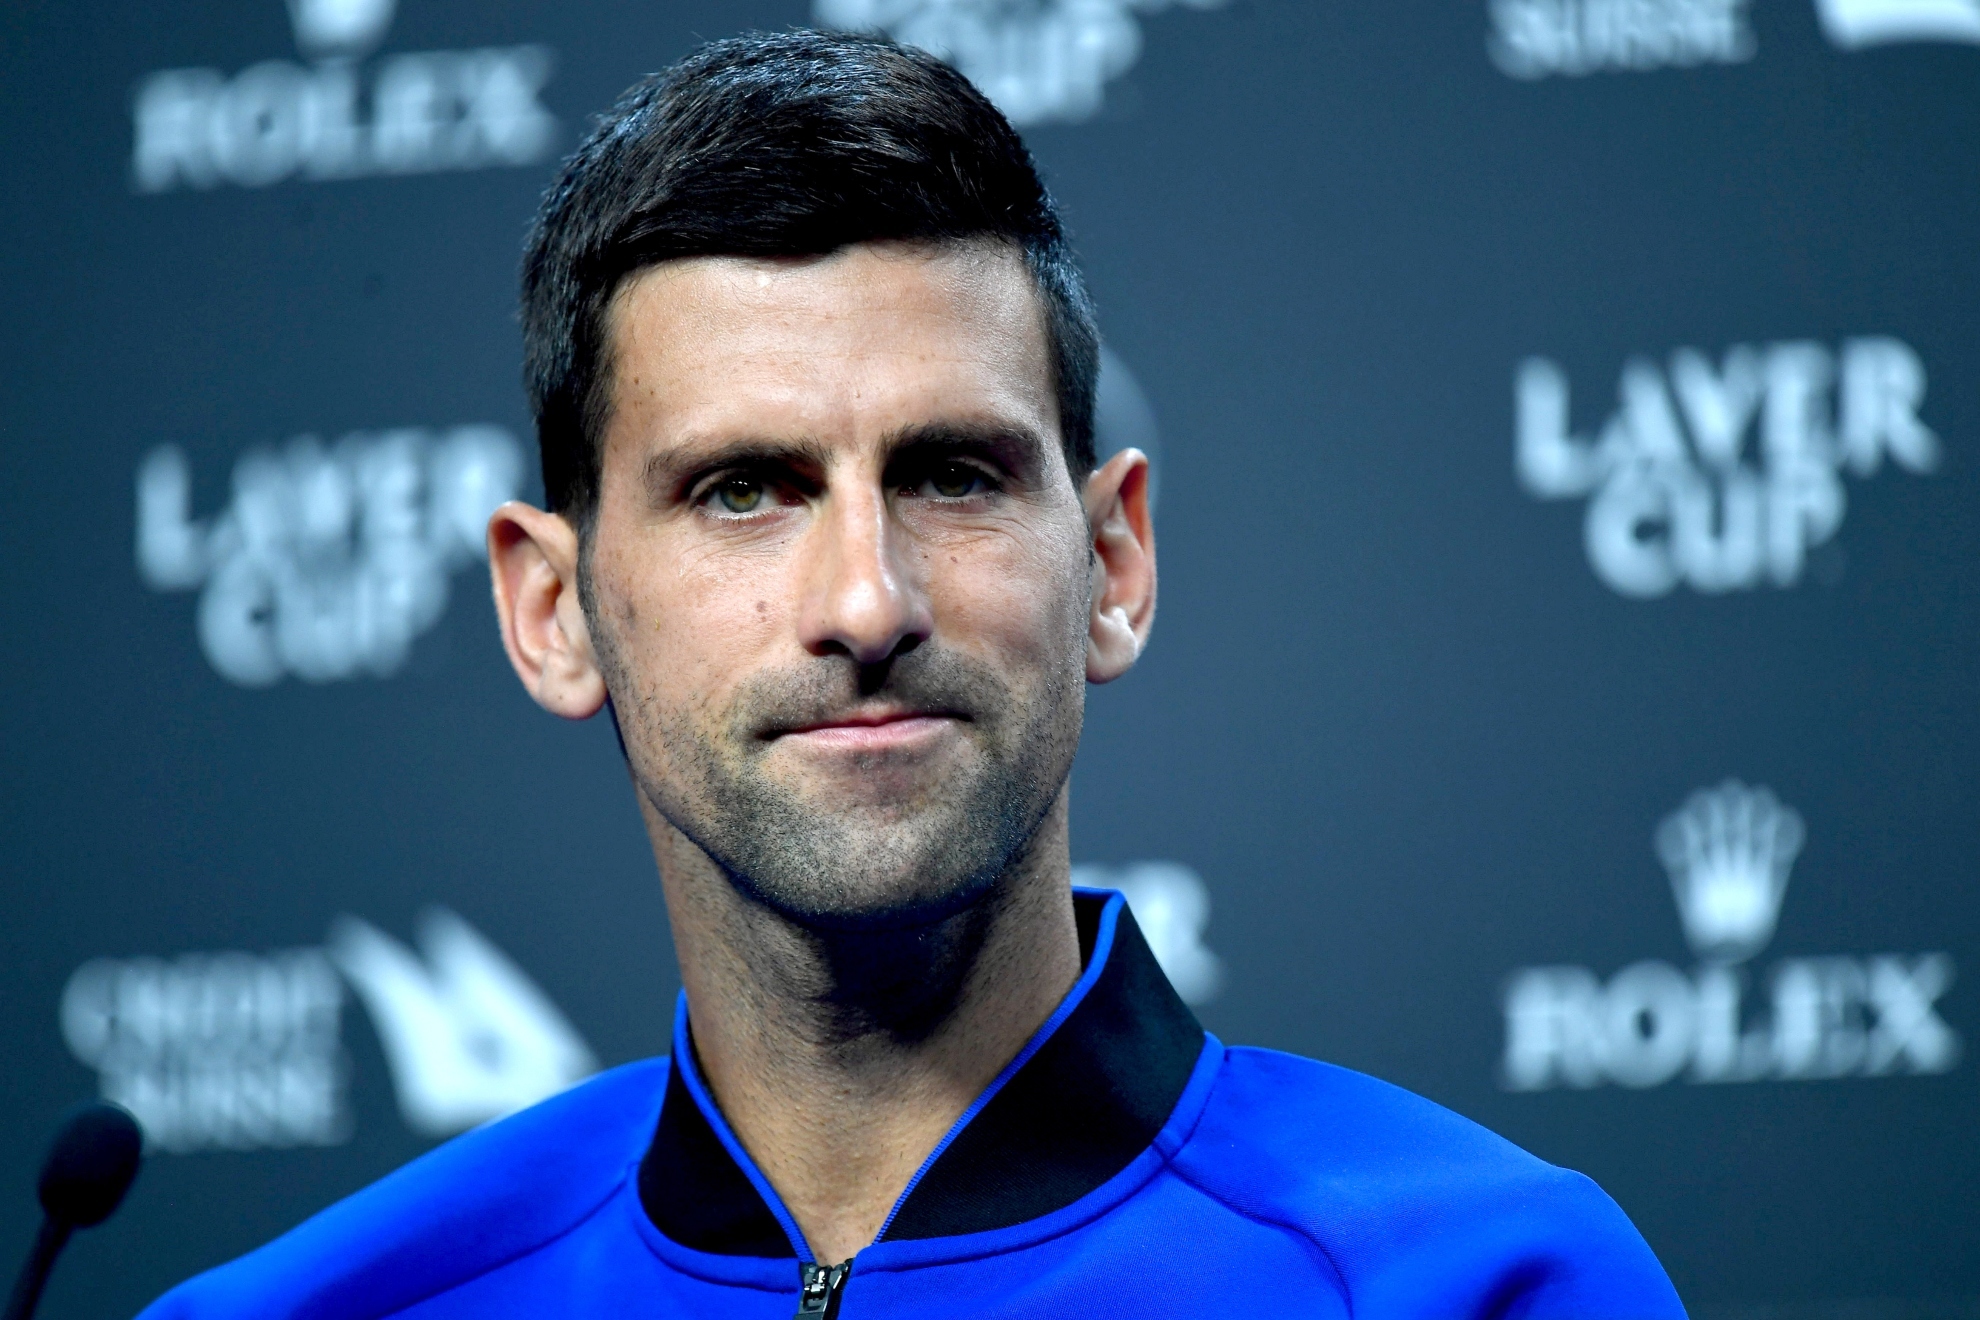 Djokovic: Alcaraz is not the future, he is the present, it's incredible what he has achieved